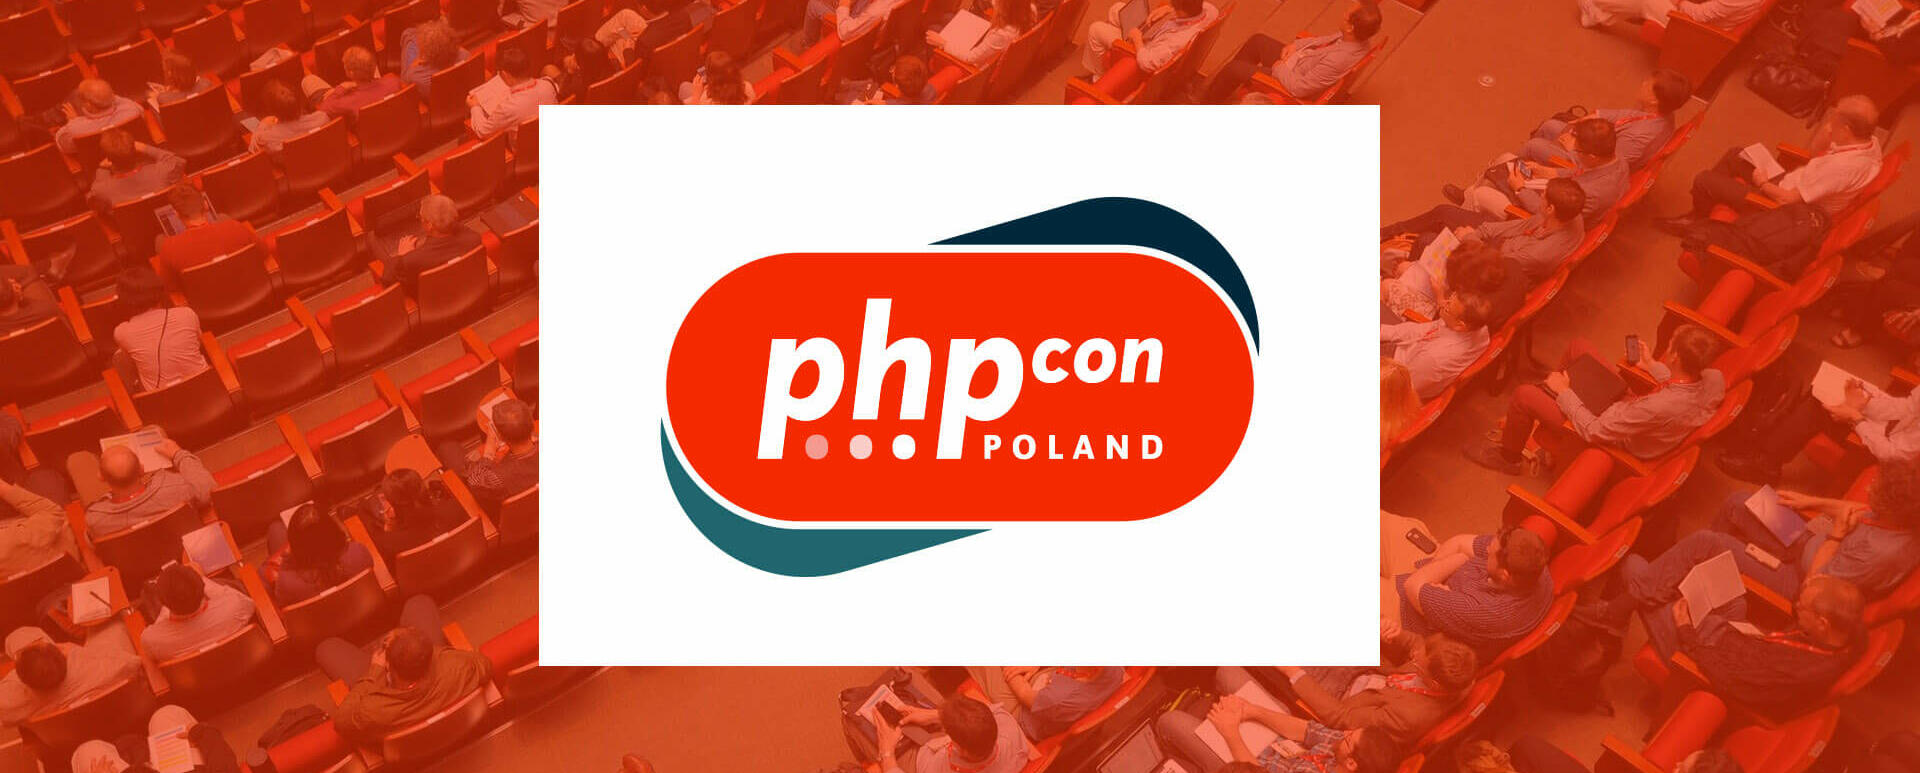 At the background, there's aphoto of conference attendees while listening to a lecture. In the middle - logo of the PHPConPoland 2019 conference